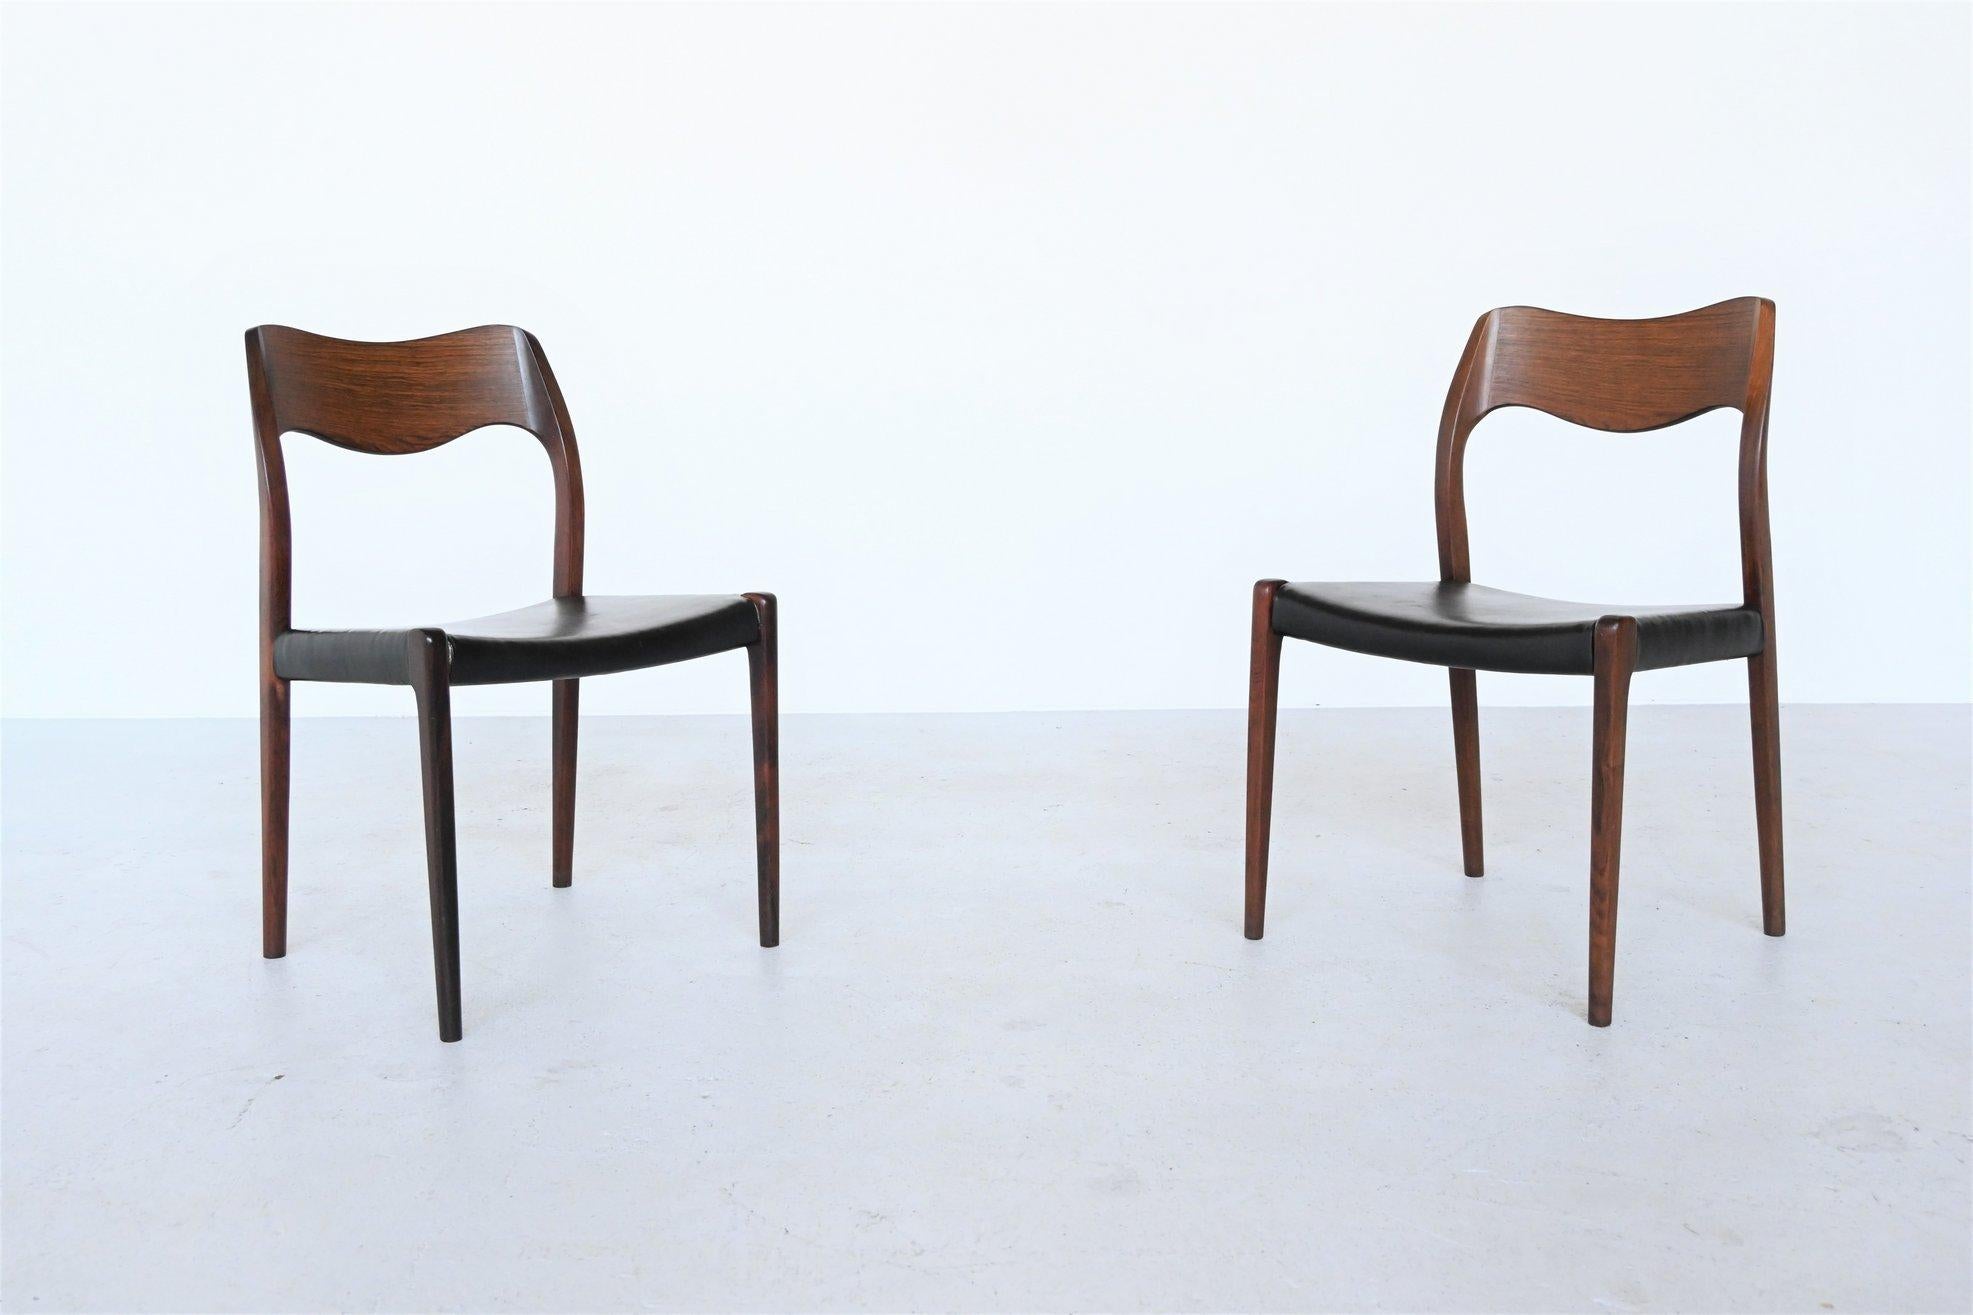 Very nice shaped pair of dining chairs model 71 designed by Niels Otto Moller and manufactured by J.L. Møller Mobelfabrik, Denmark, 1951. These Danish well-crafted chairs are made of solid rosewood and are upholstered with black leather. The chairs